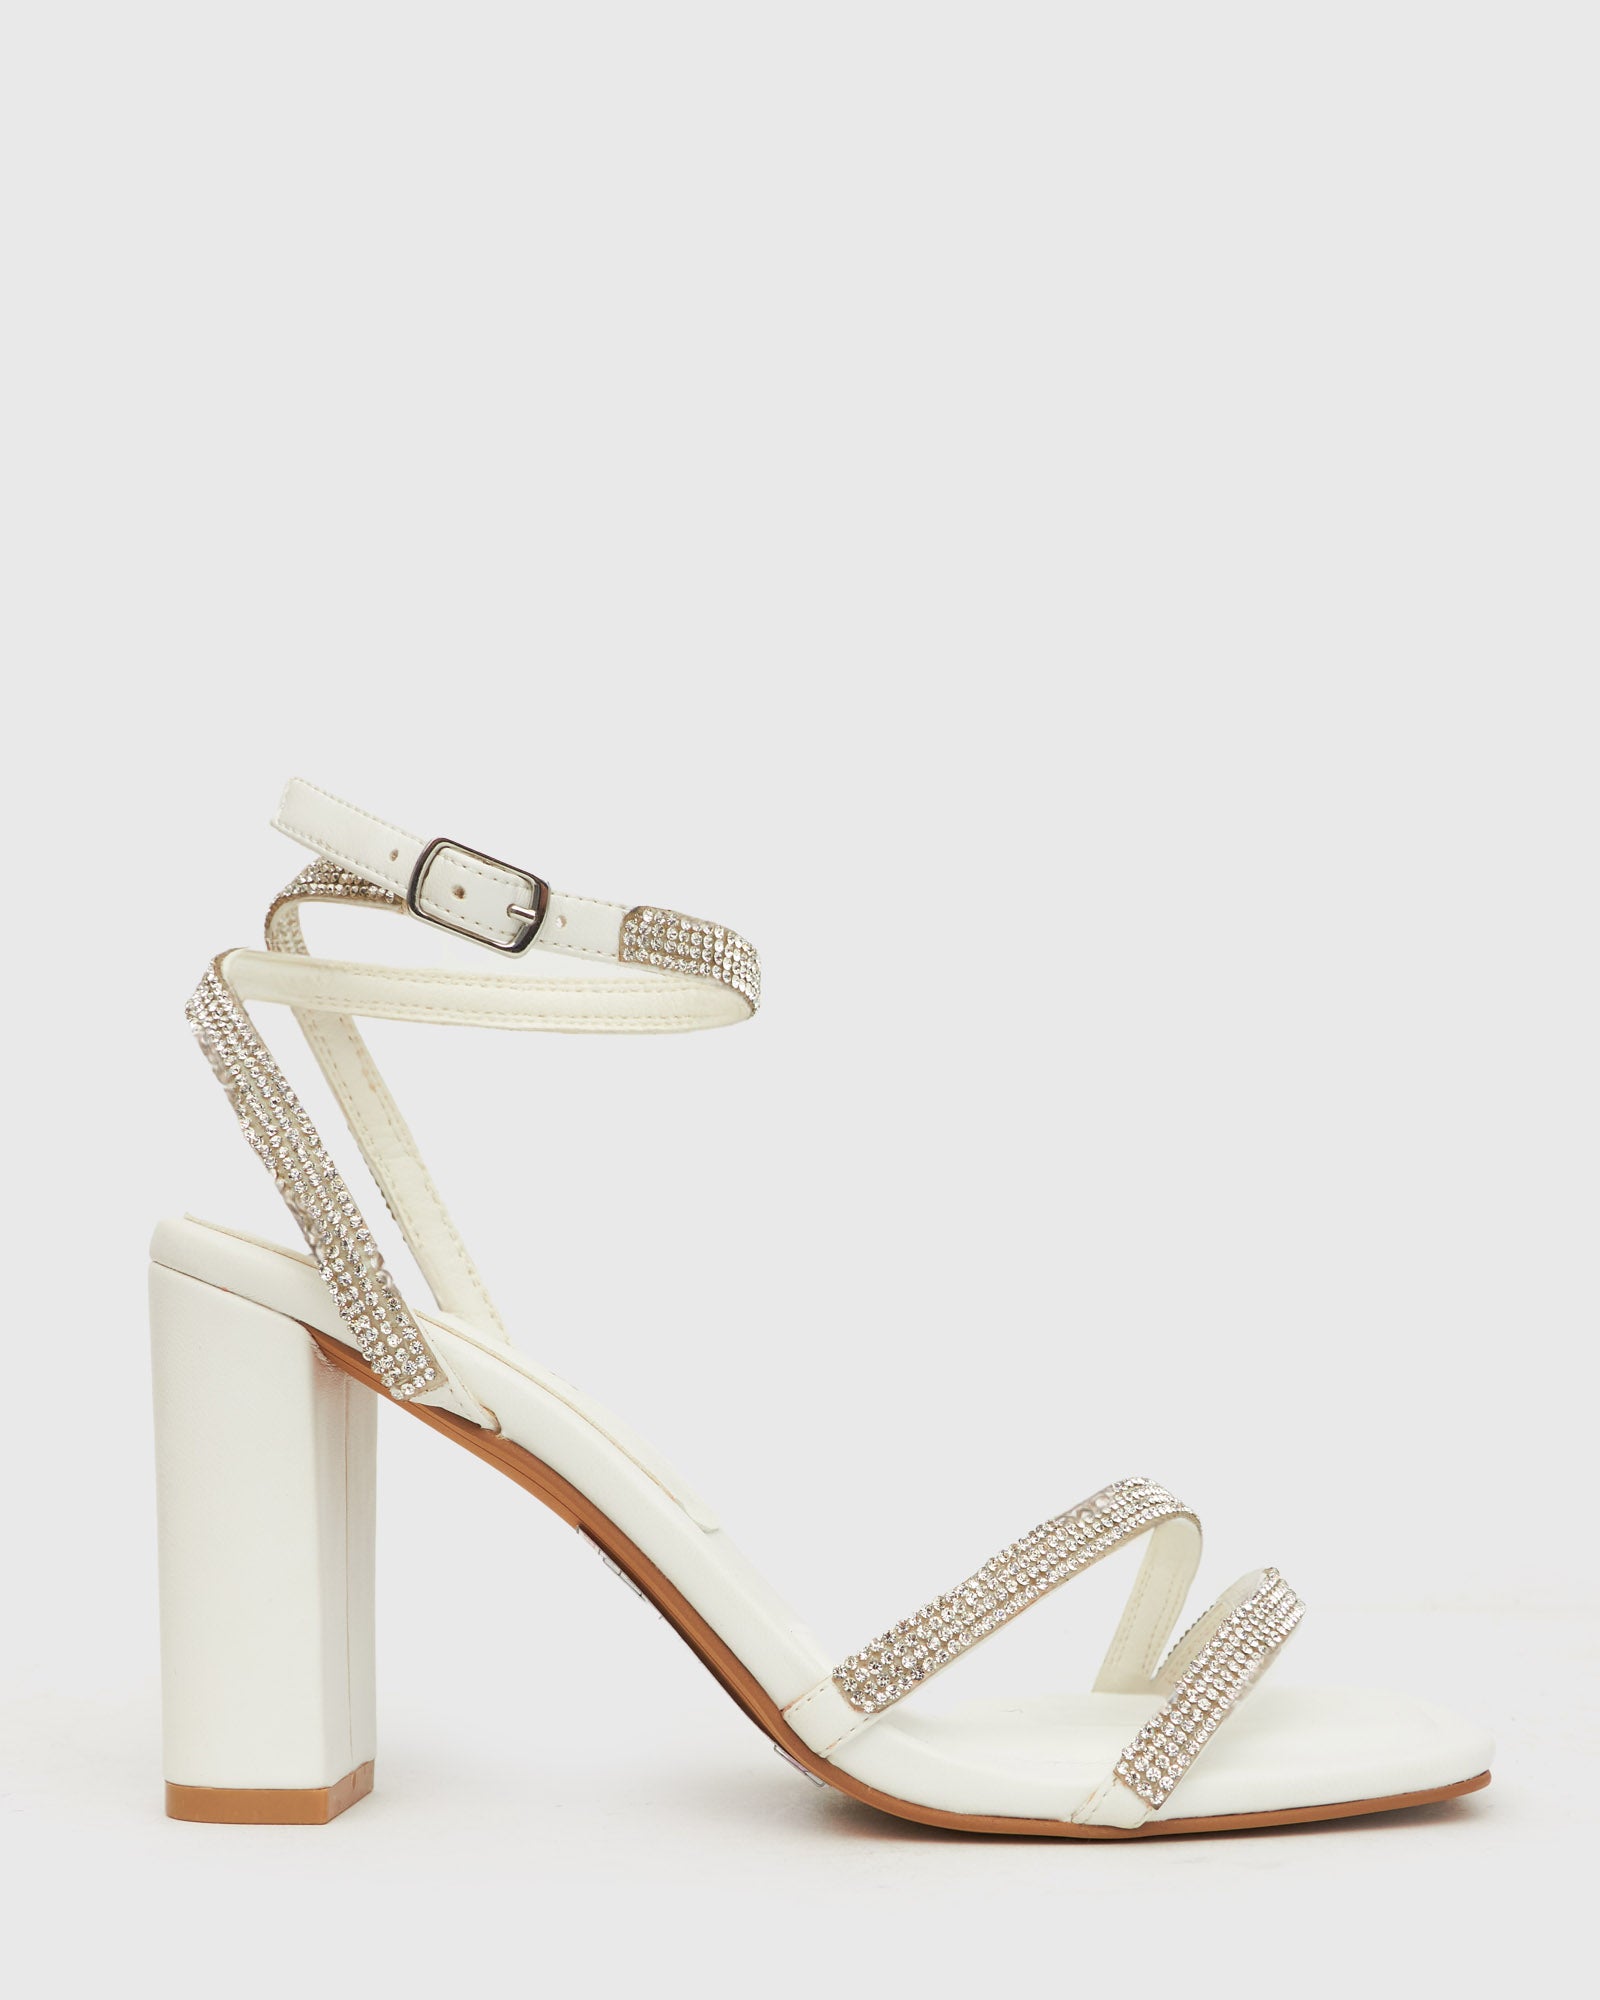 Buy SHY Square Toe Diamante Dress Sandals by Betts online - Betts